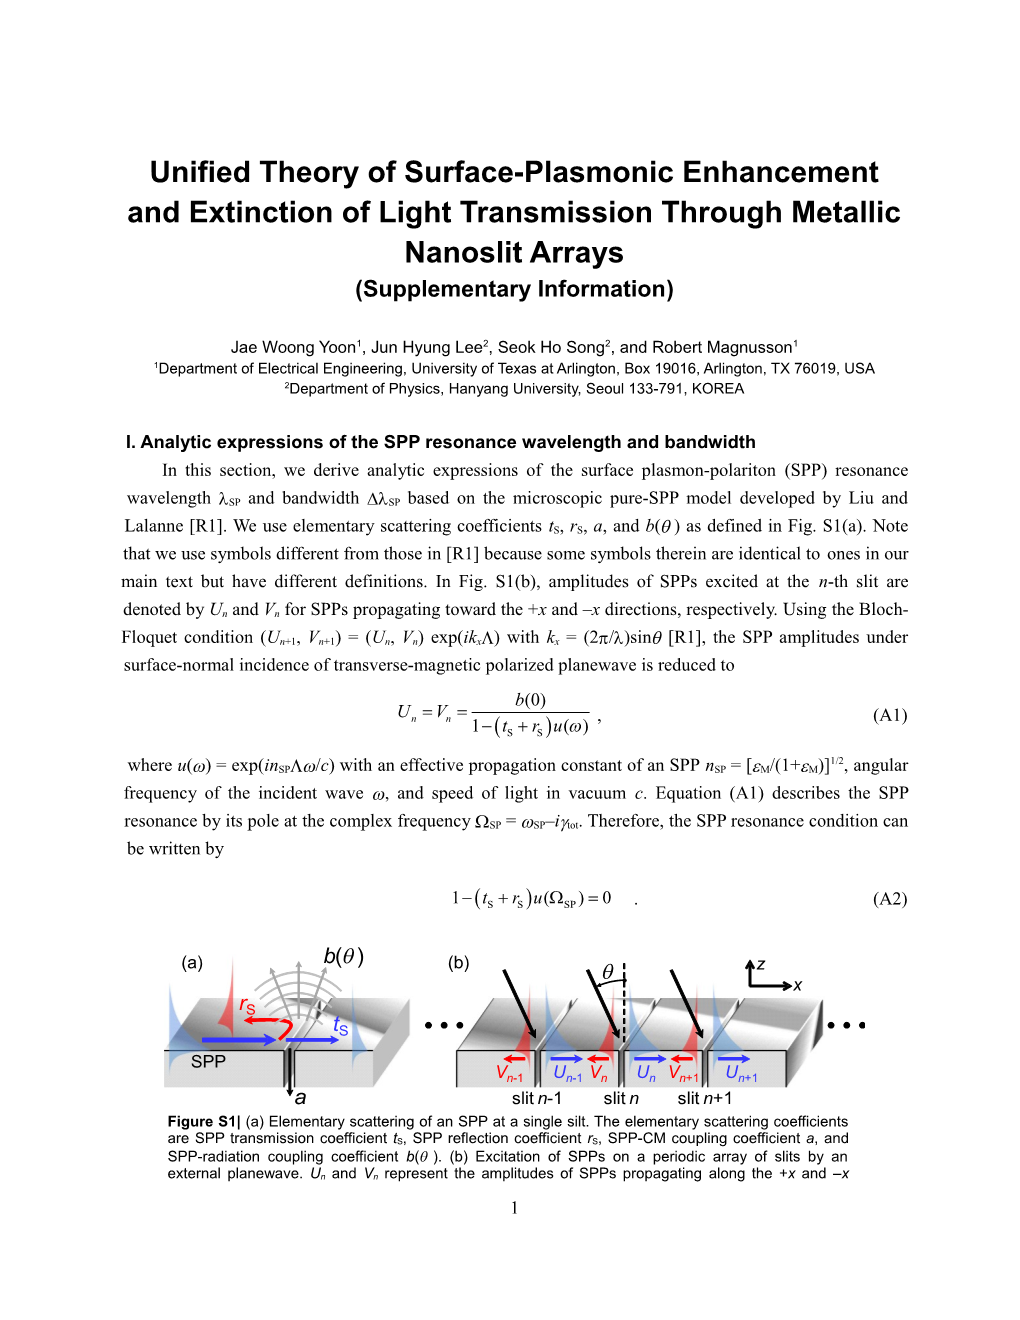 Unified Theory of Surface-Plasmonic Enhancement and Extinction of Light Transmission Through